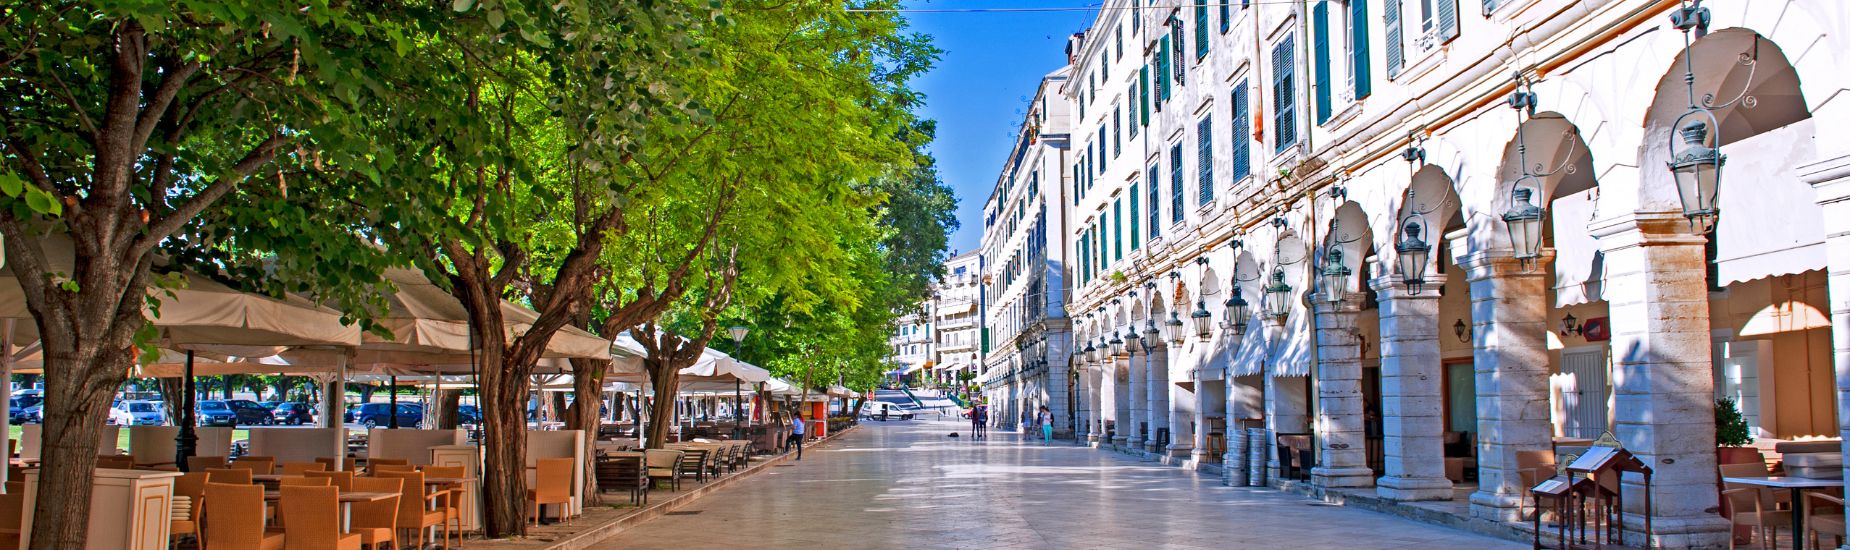 Things to do and see corfu